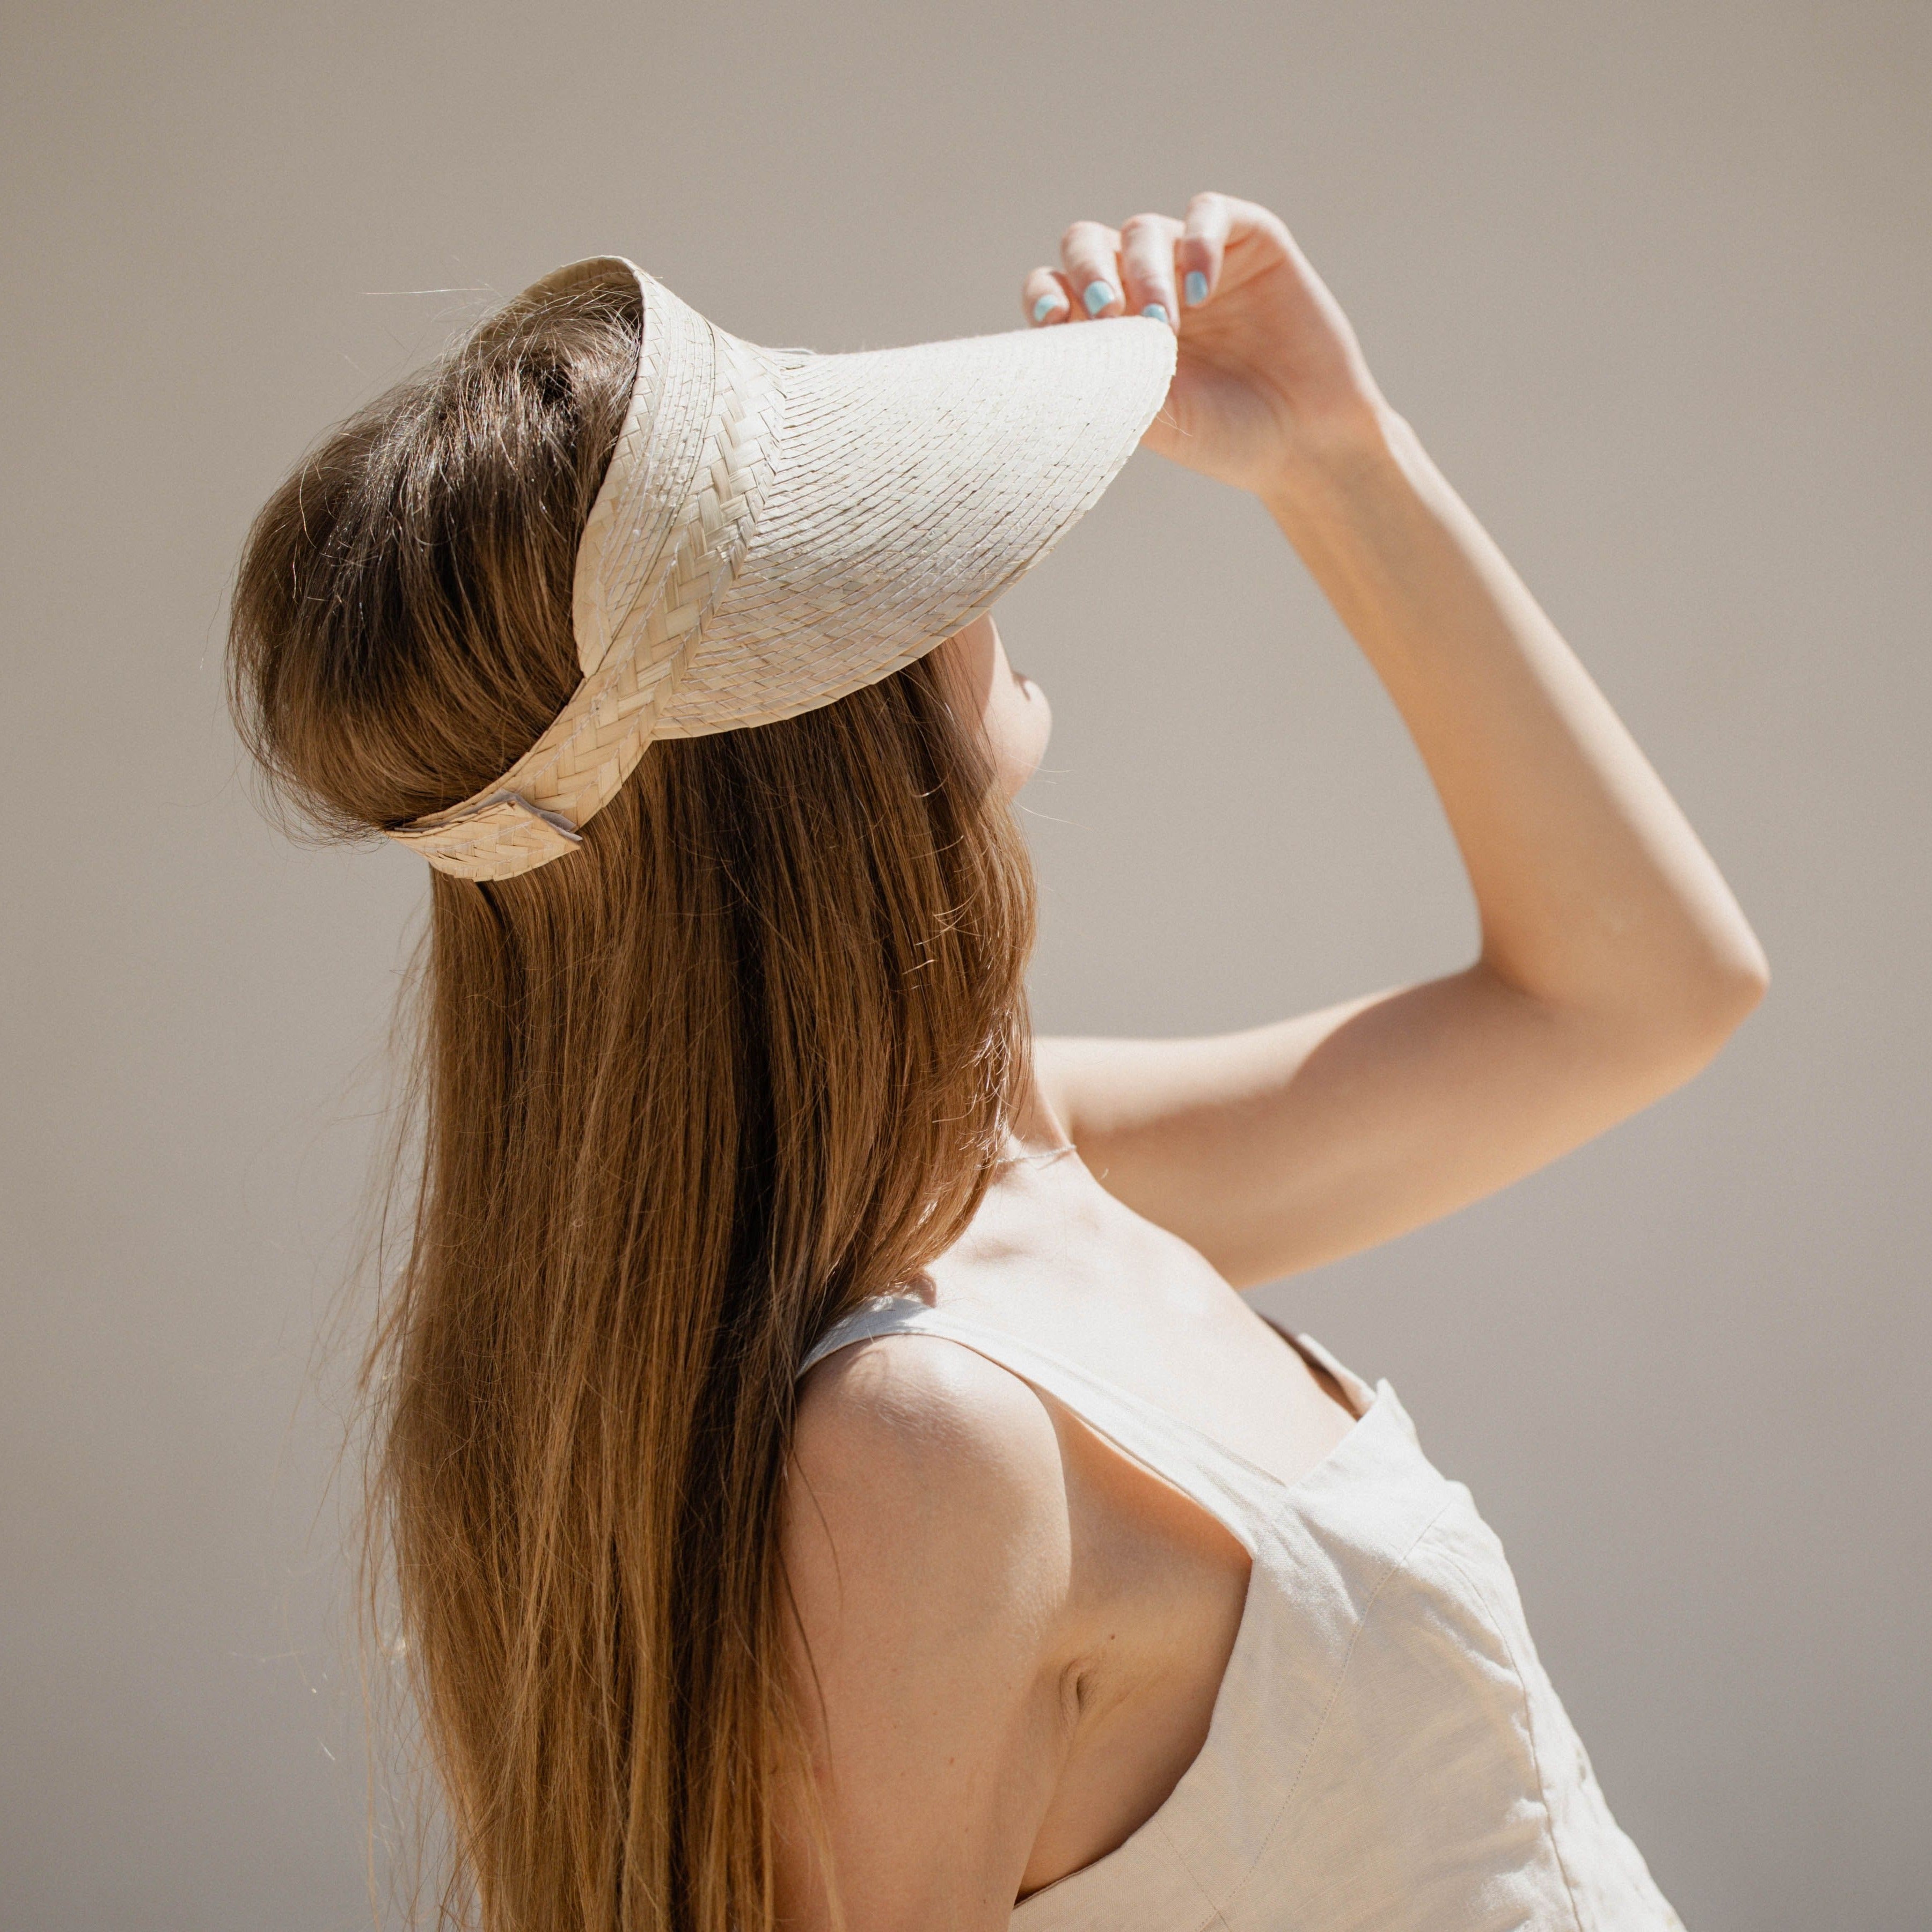 The Sunbleached Palm Straw Oversized Visor